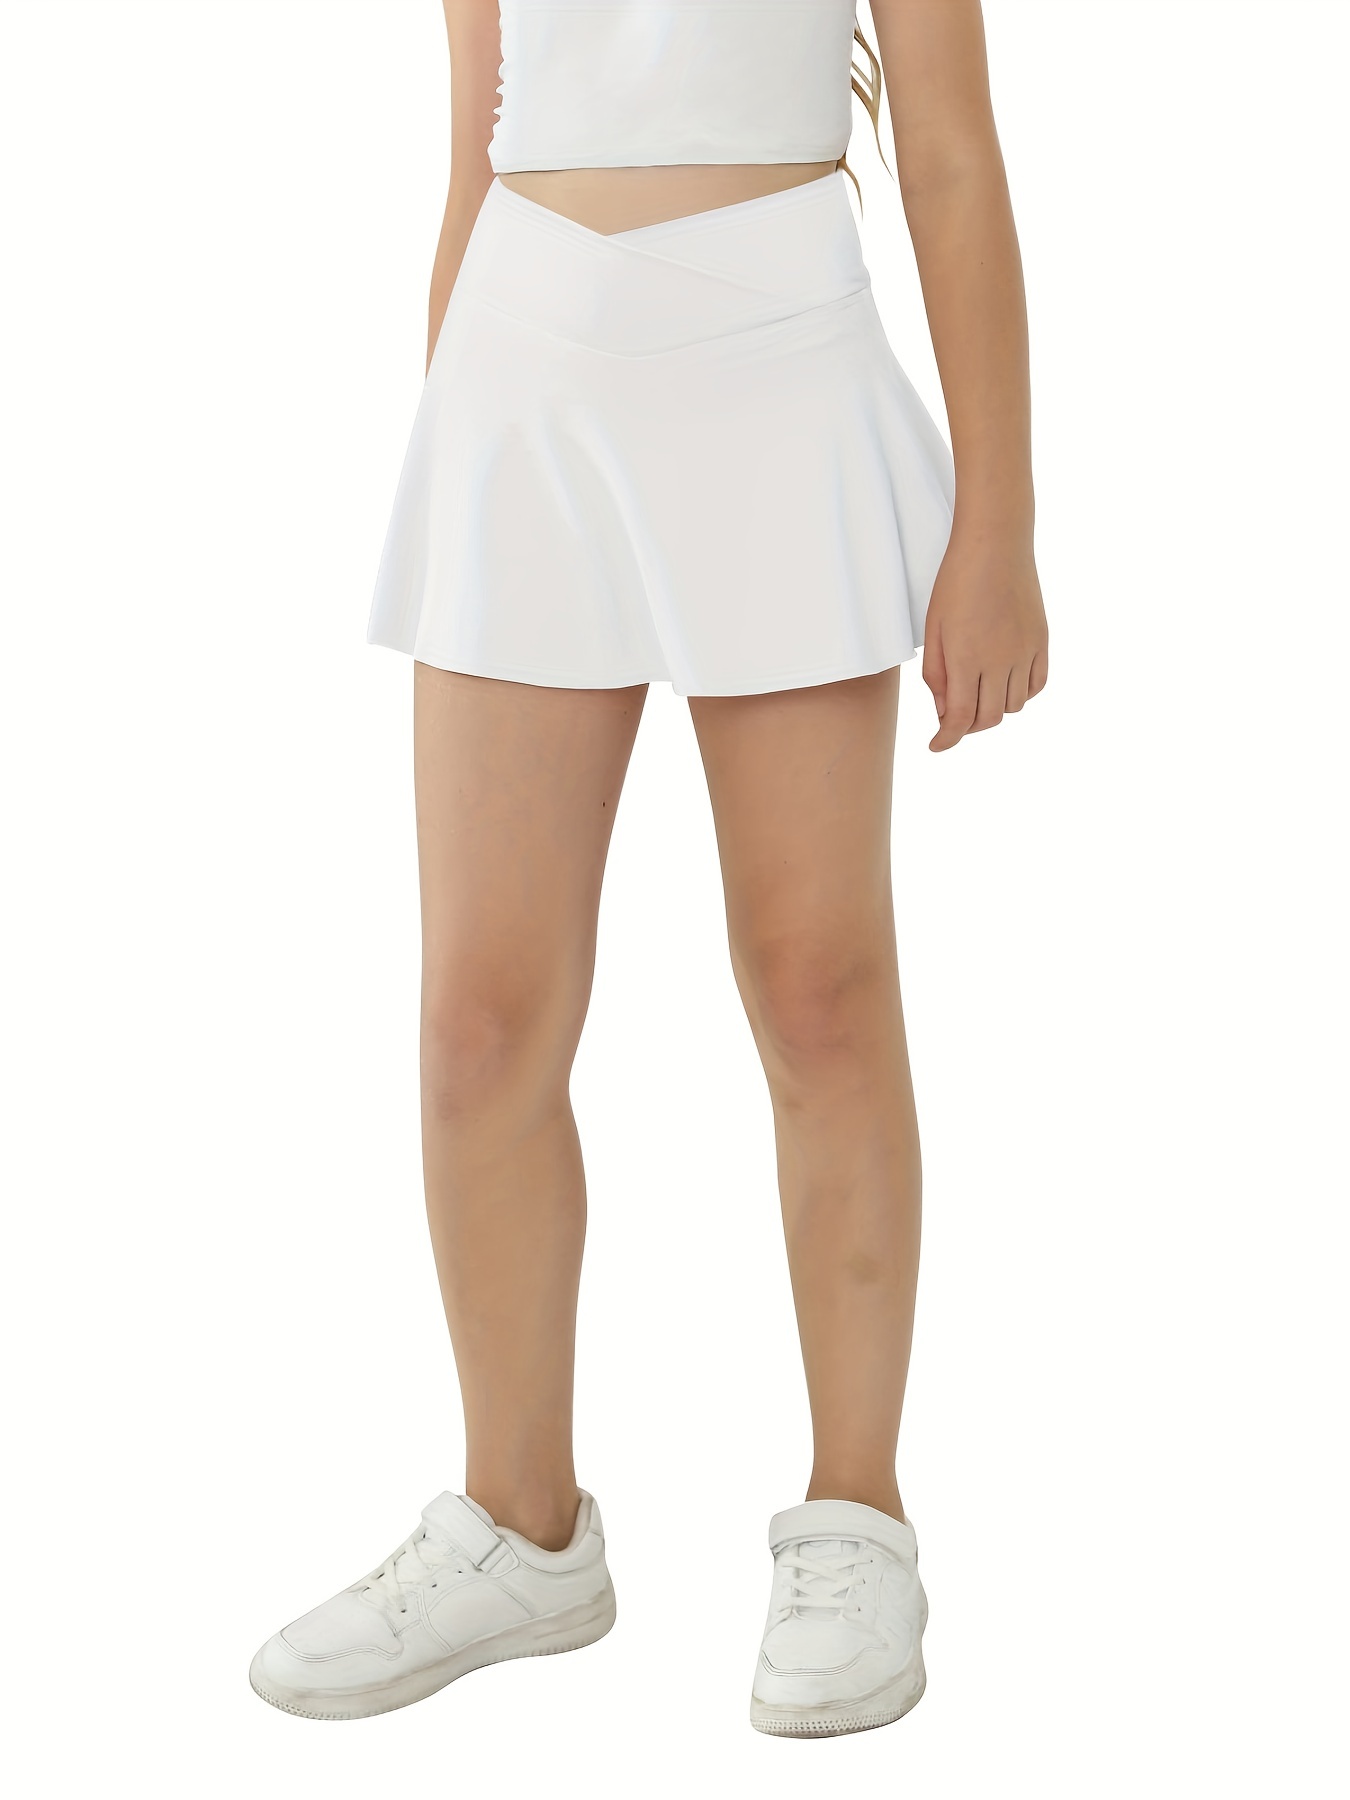 Pleated Tennis Skirts for Women High Waisted Athletic Golf Skorts